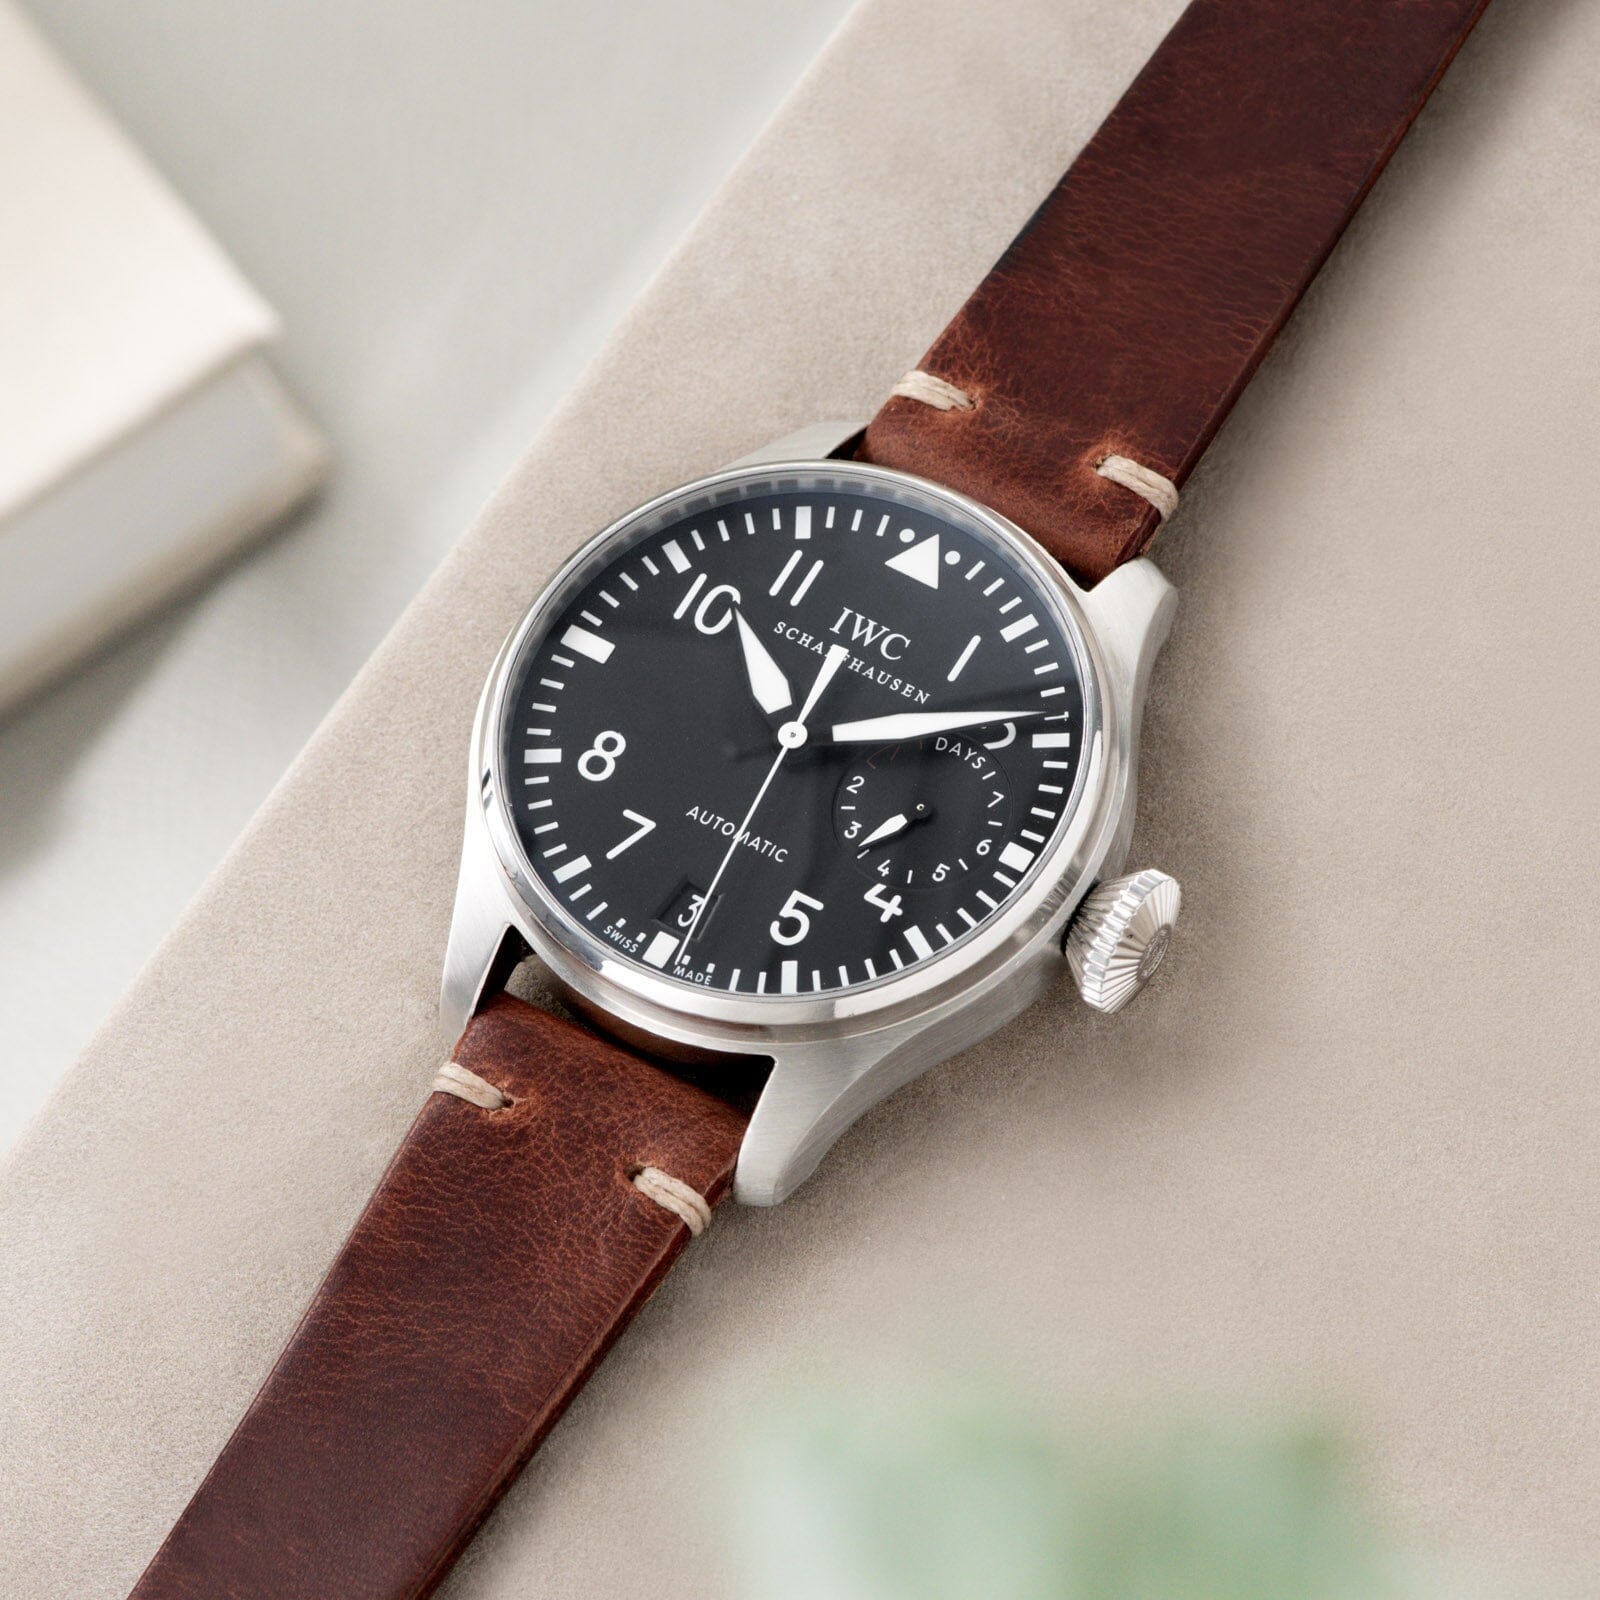 Siena Brown Leather Watch Strap on a IWC Pilot